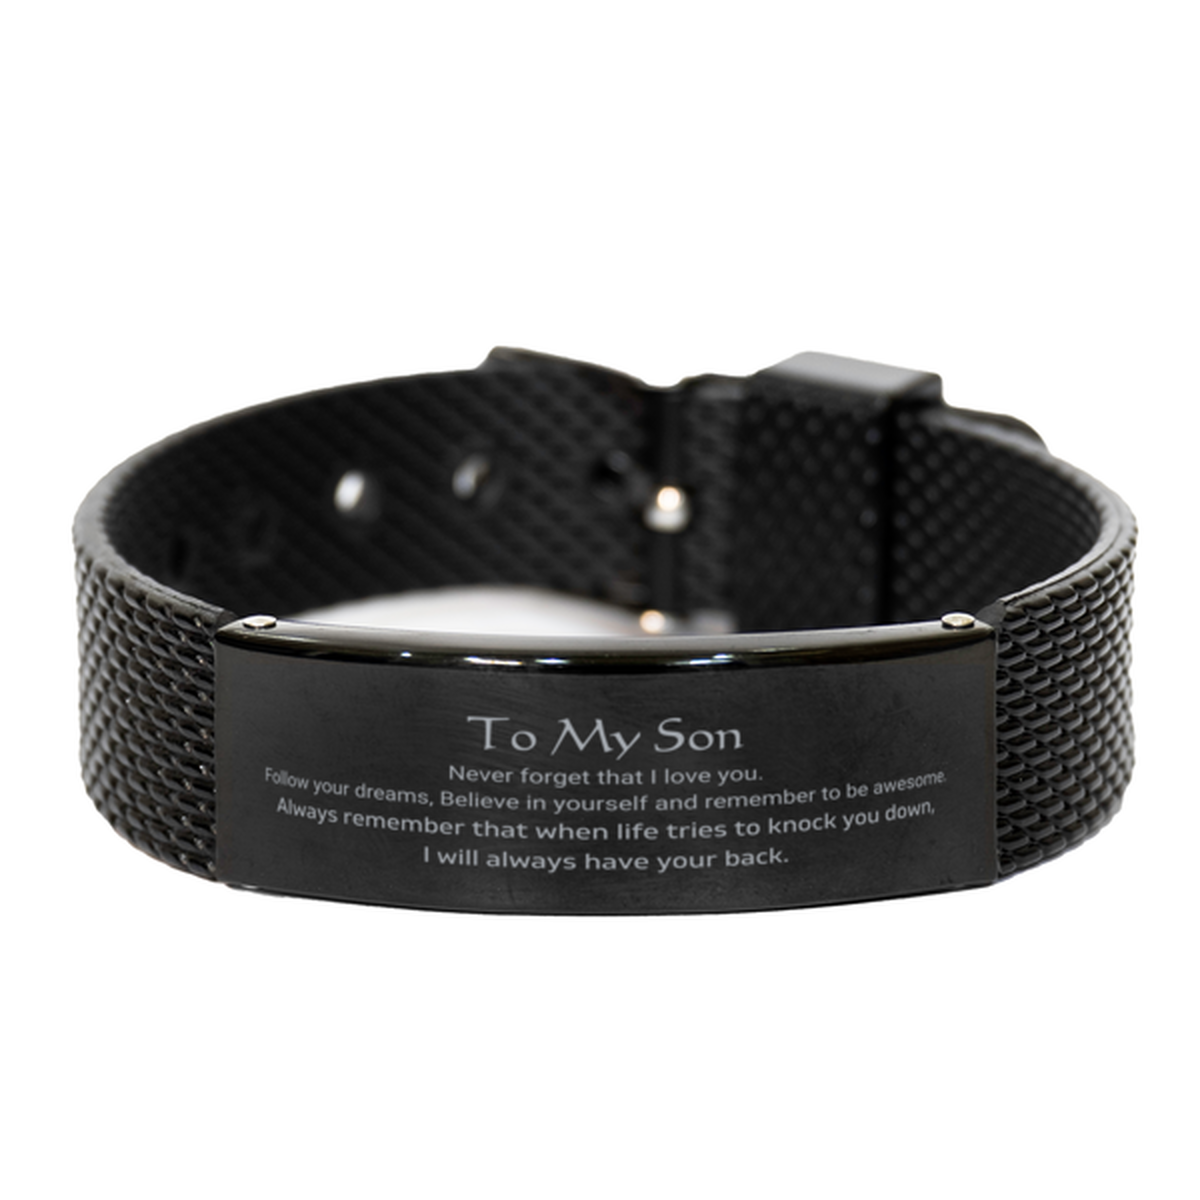 Inspirational Gifts for Son, Follow your dreams, Believe in yourself, Son Black Shark Mesh Bracelet, Birthday Christmas Unique Gifts For Son